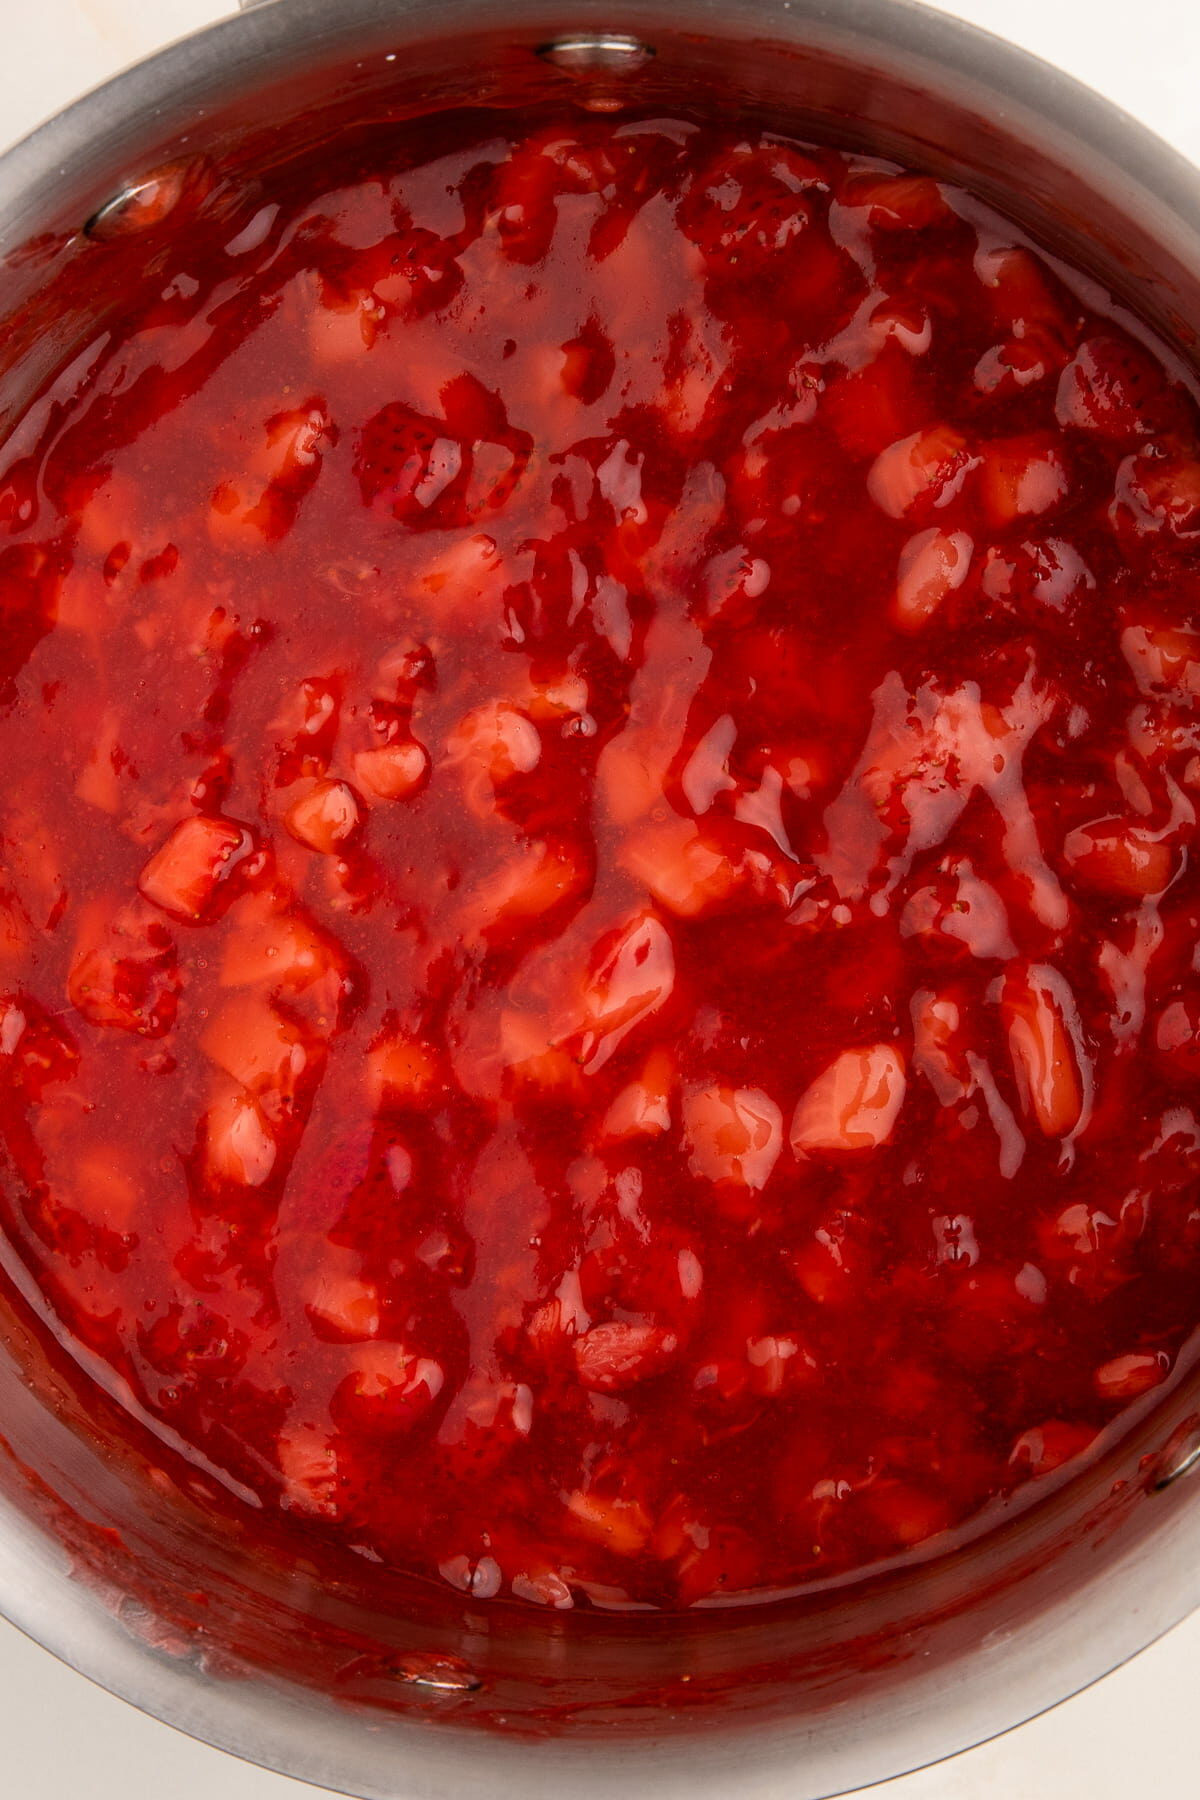 strawberry filling in saucepan up close.